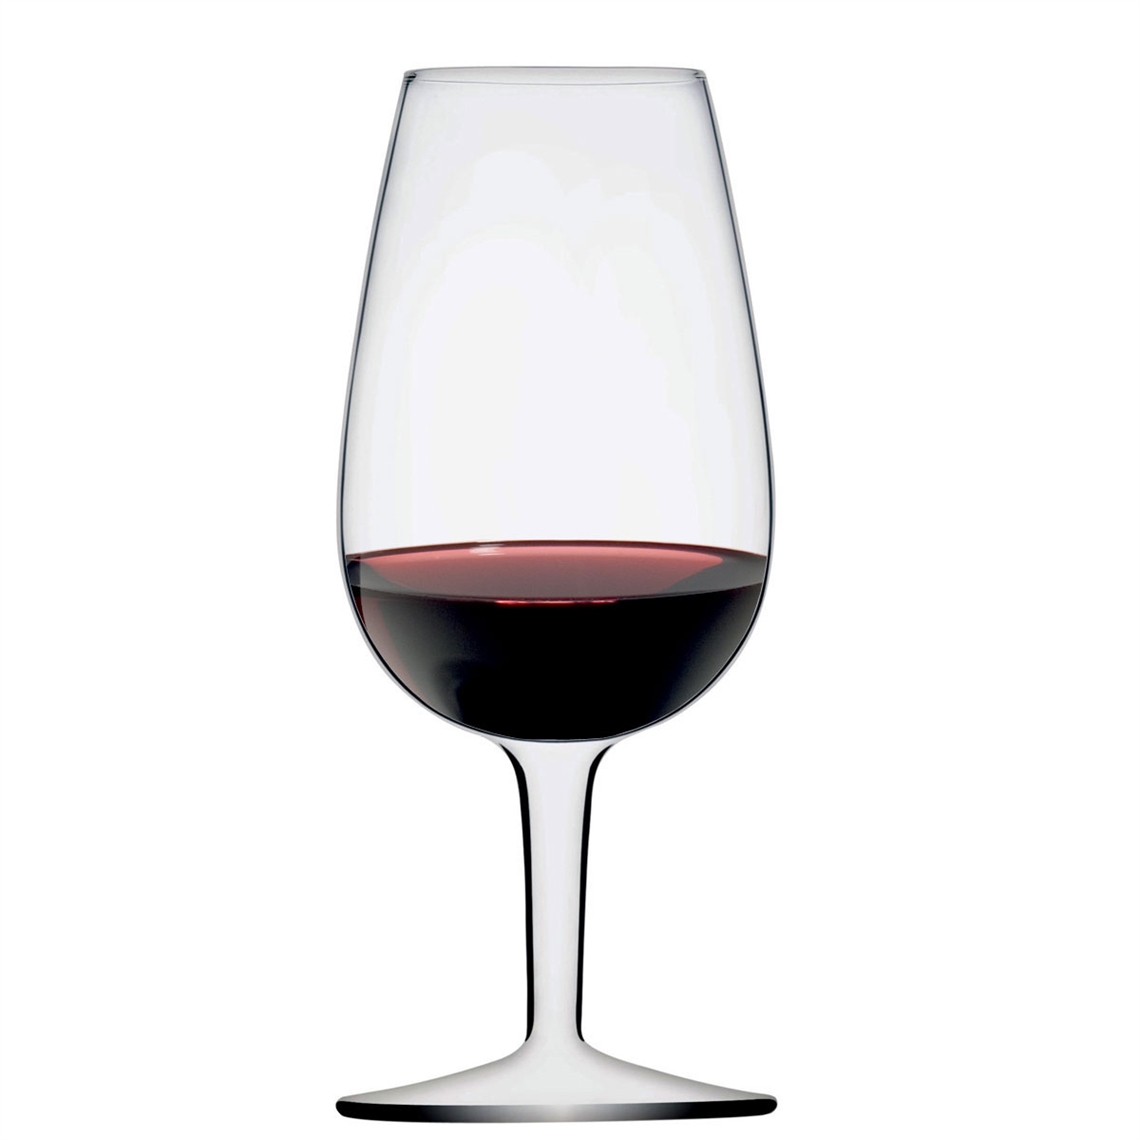 View more what makes iso wine tasting glasses so popular? from our Wine Tasting Glasses range